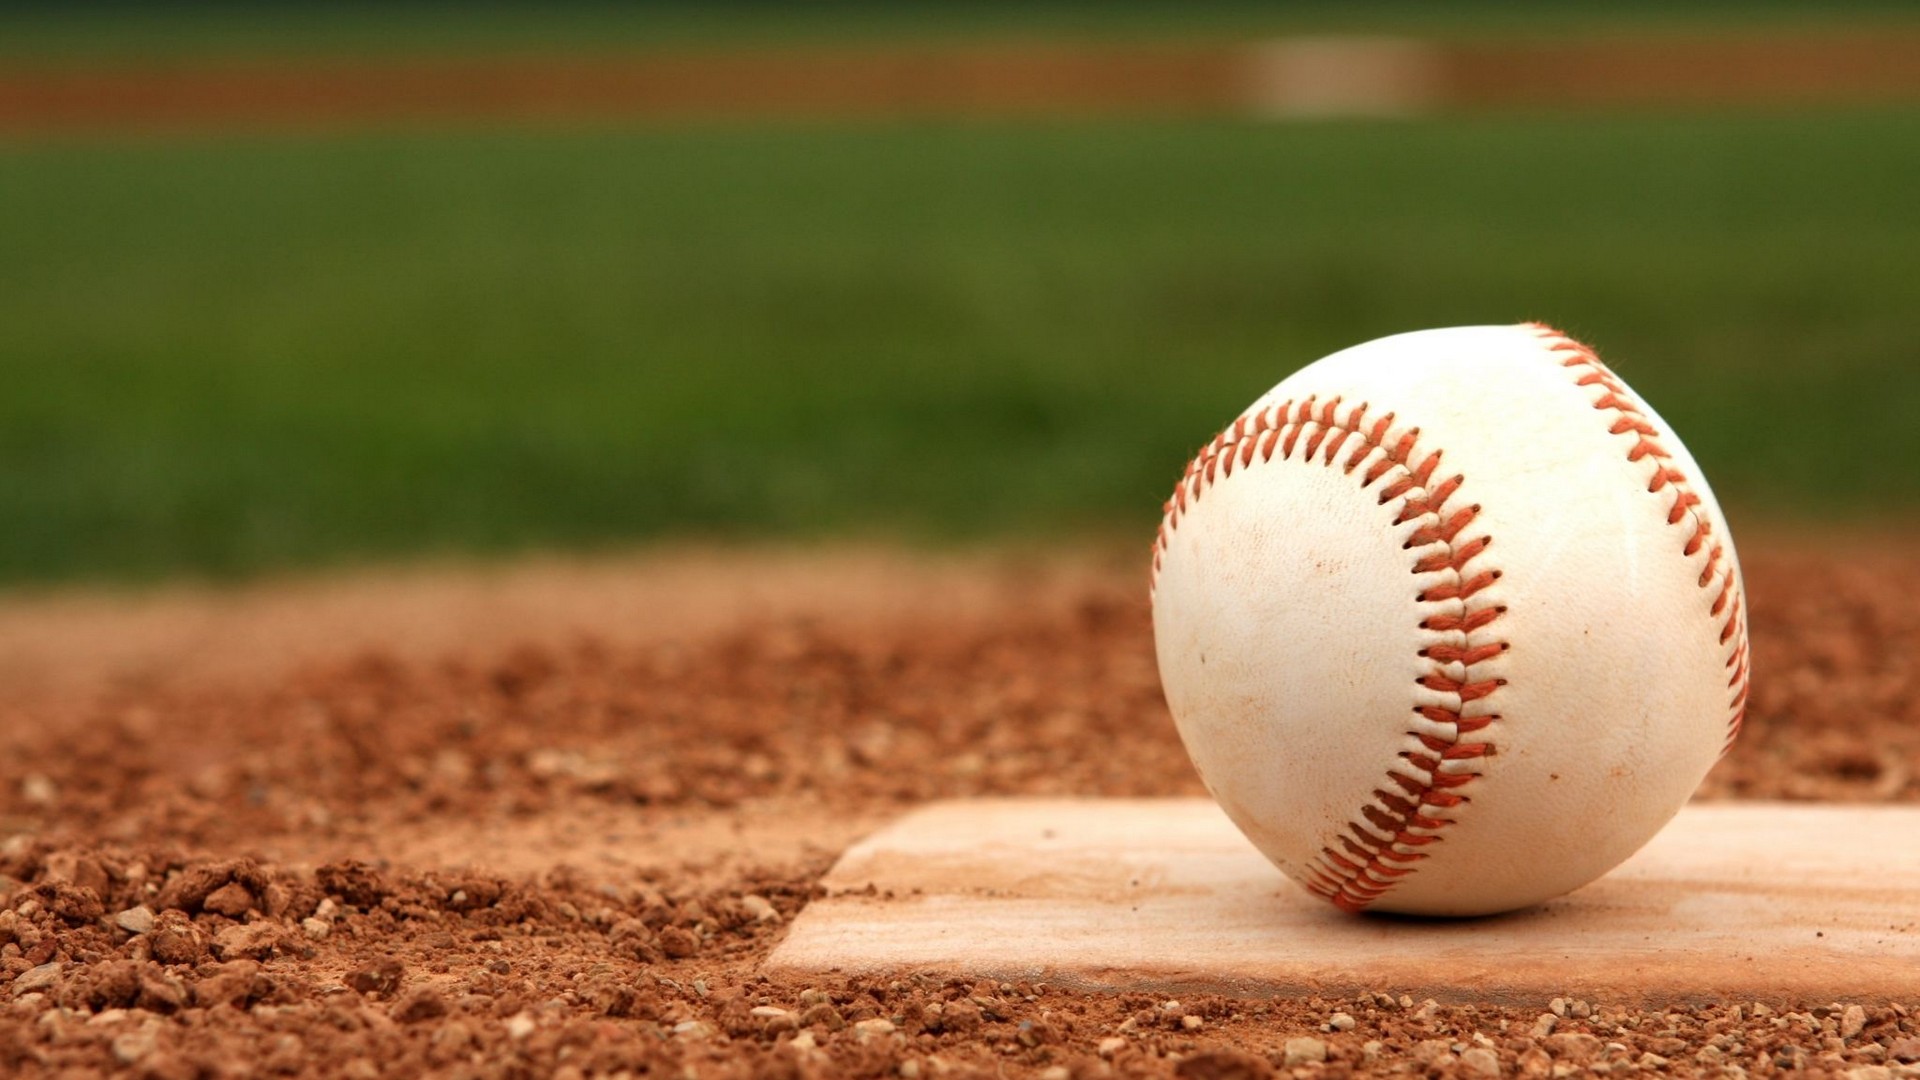 Cool Baseball Wallpaper with high-resolution 1920x1080 pixel. You can use this wallpaper for Mac Desktop Wallpaper, Laptop Screensavers, Android Wallpapers, Tablet or iPhone Home Screen and another mobile phone device